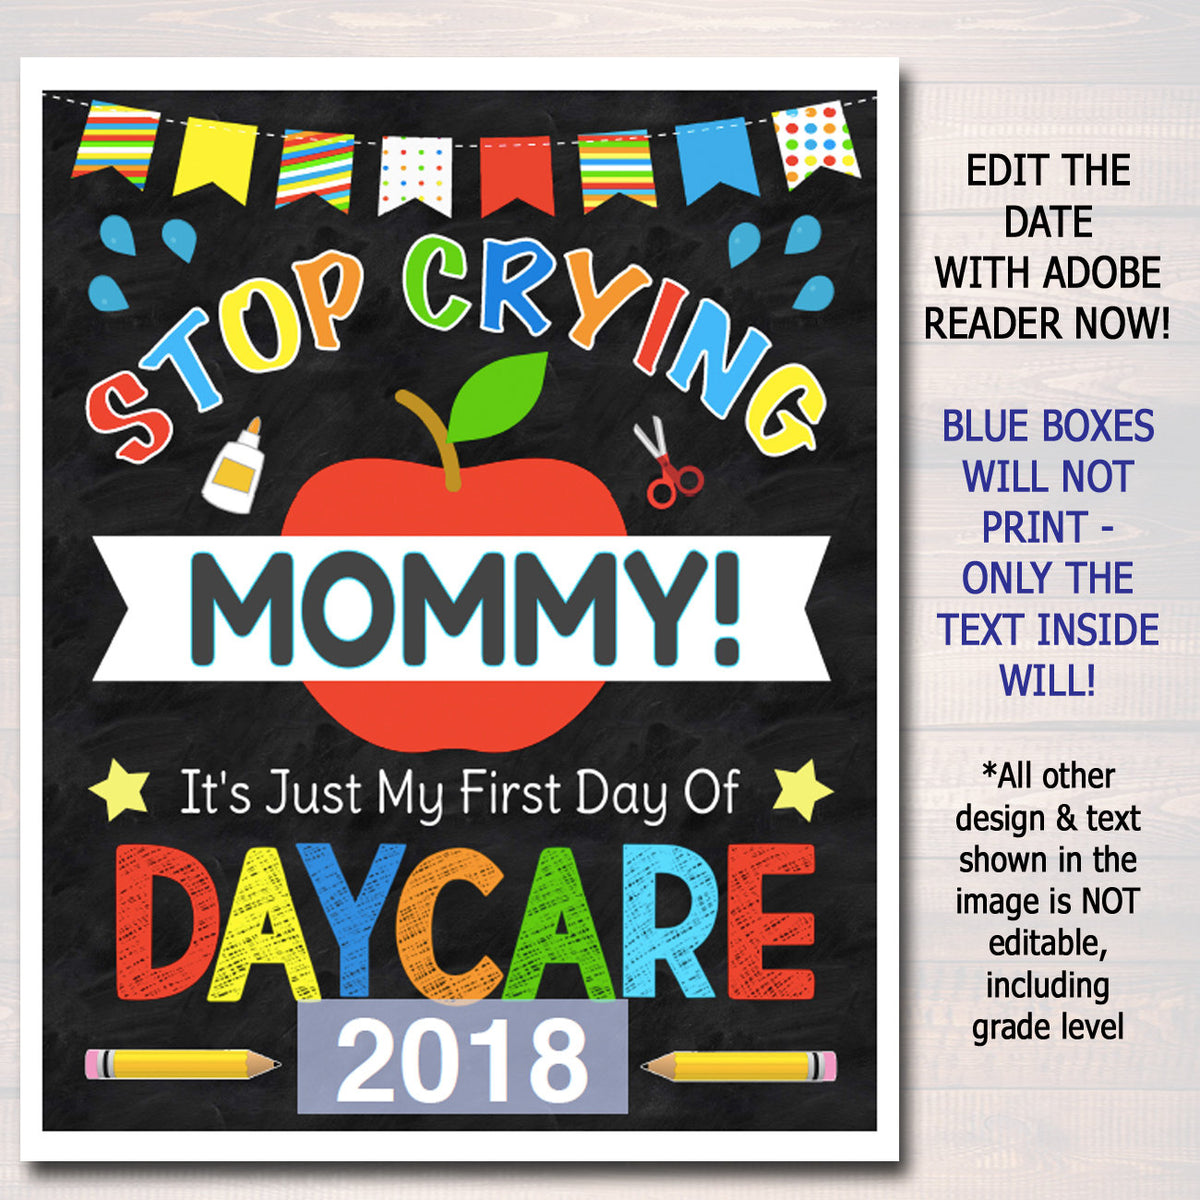 stop-crying-mommy-first-day-of-daycare-chalkboard-sign-tidylady